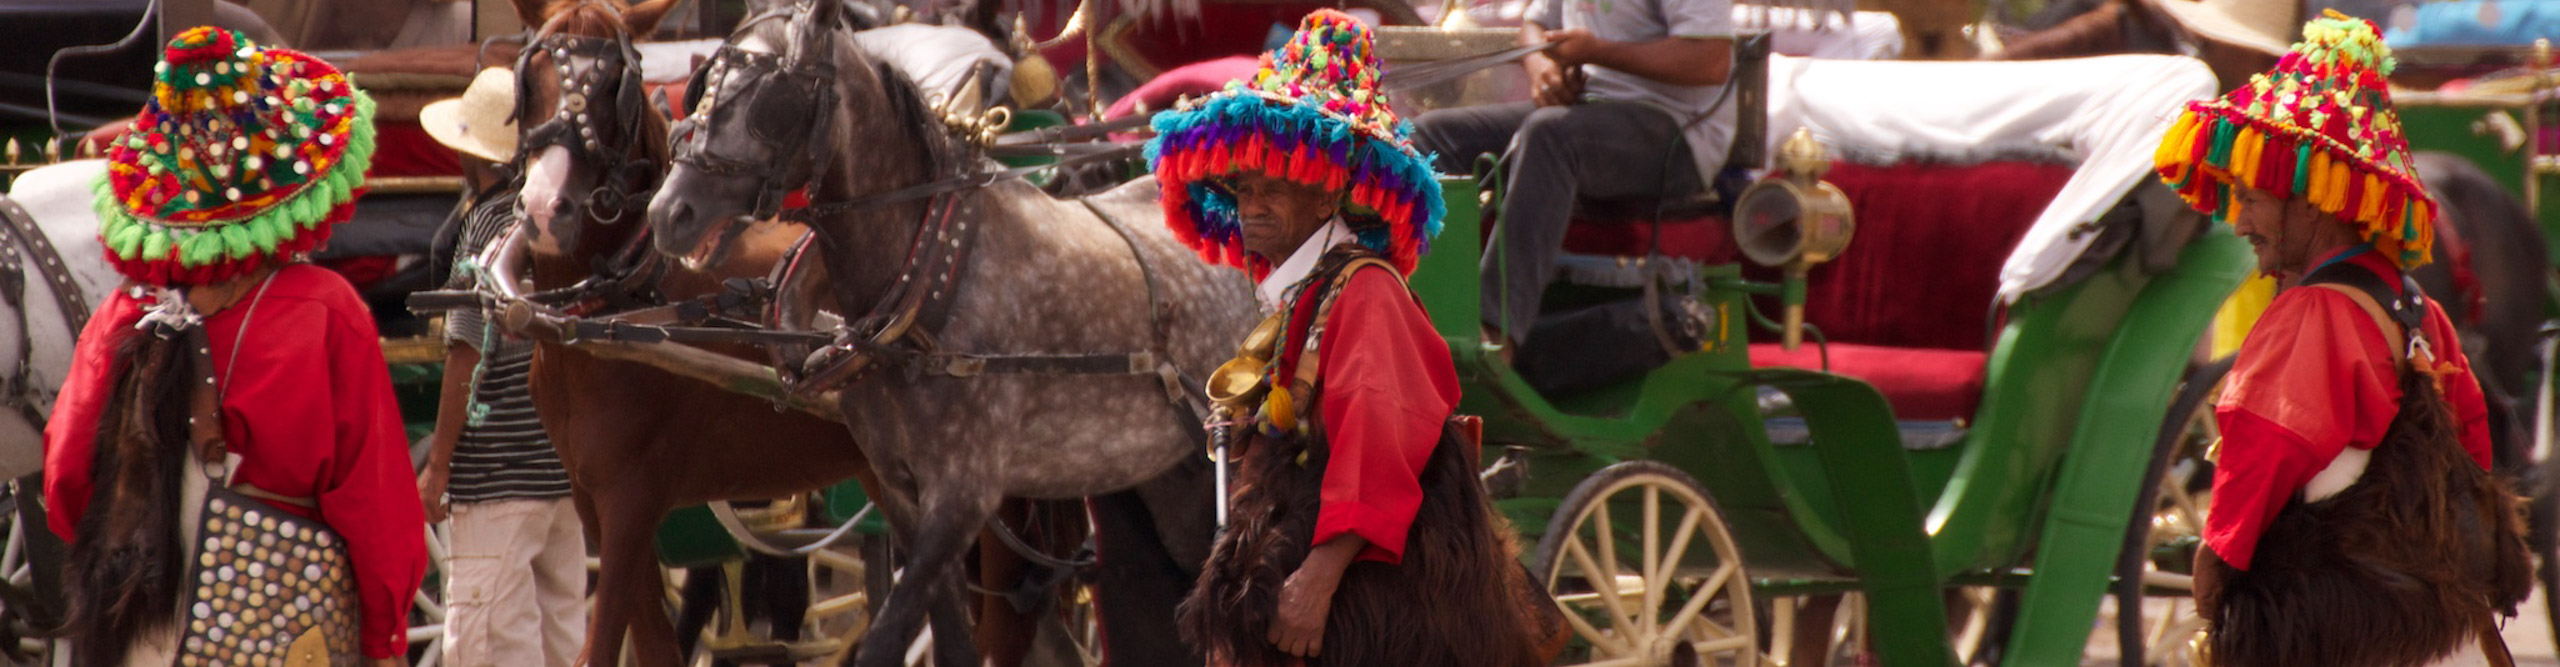 Men in traditional clothes and headwear standing with horses in Morocco 